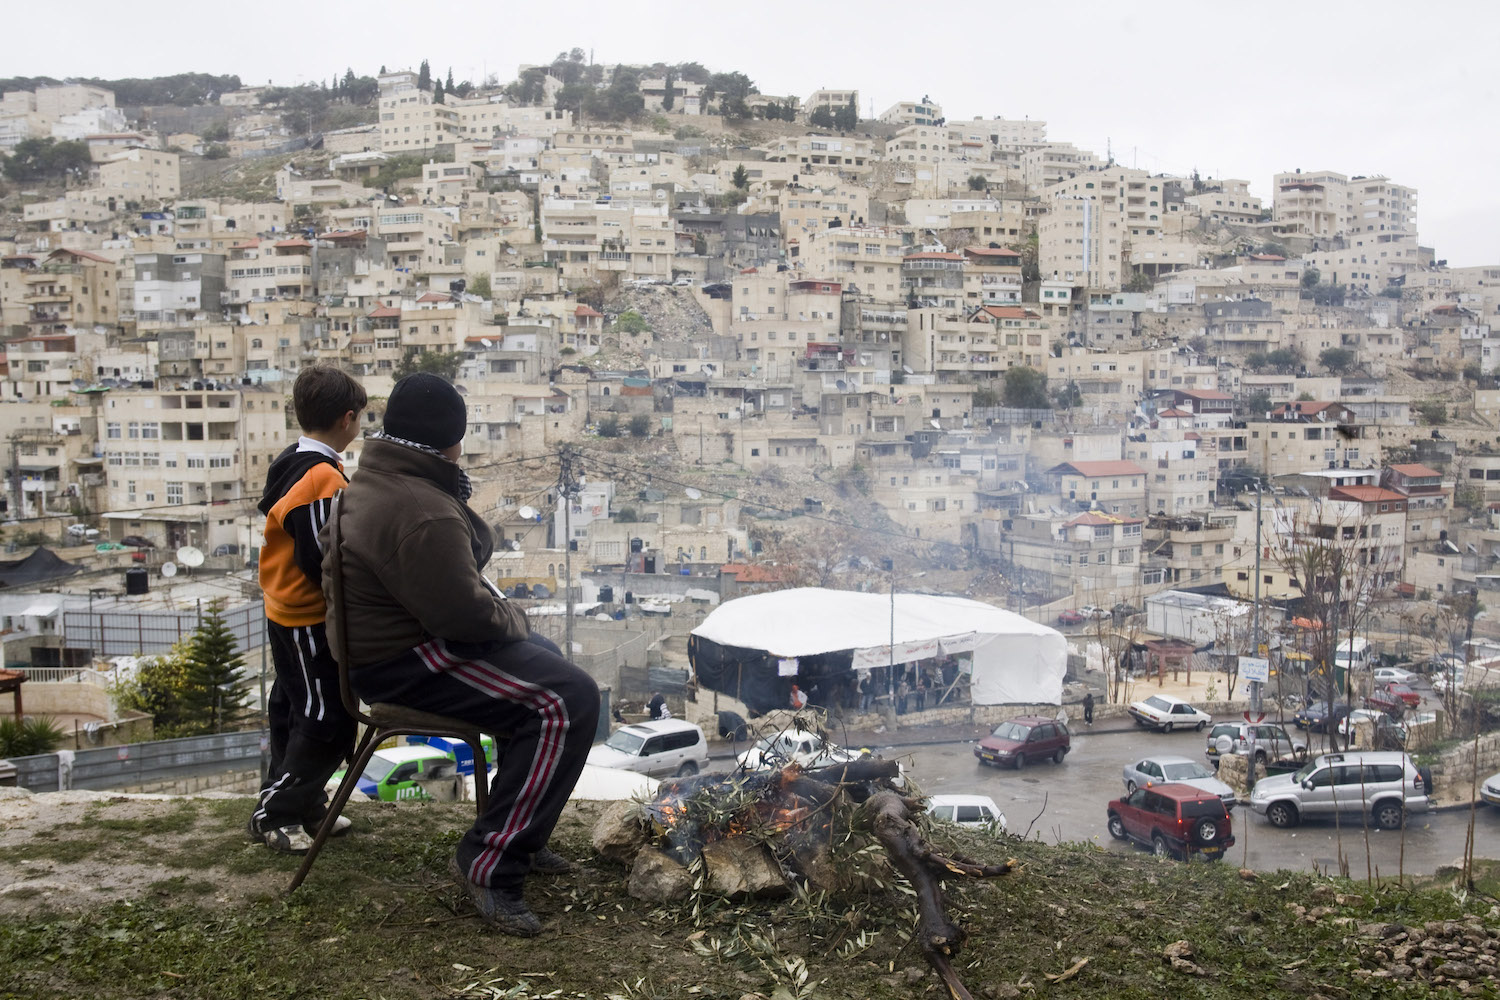 Palestinians look over a protest tent against evictions and home demolitions in the East Jerusalem neighborhood of Silwan, February 27, 2009. (Oren Ziv/Activestills.org)